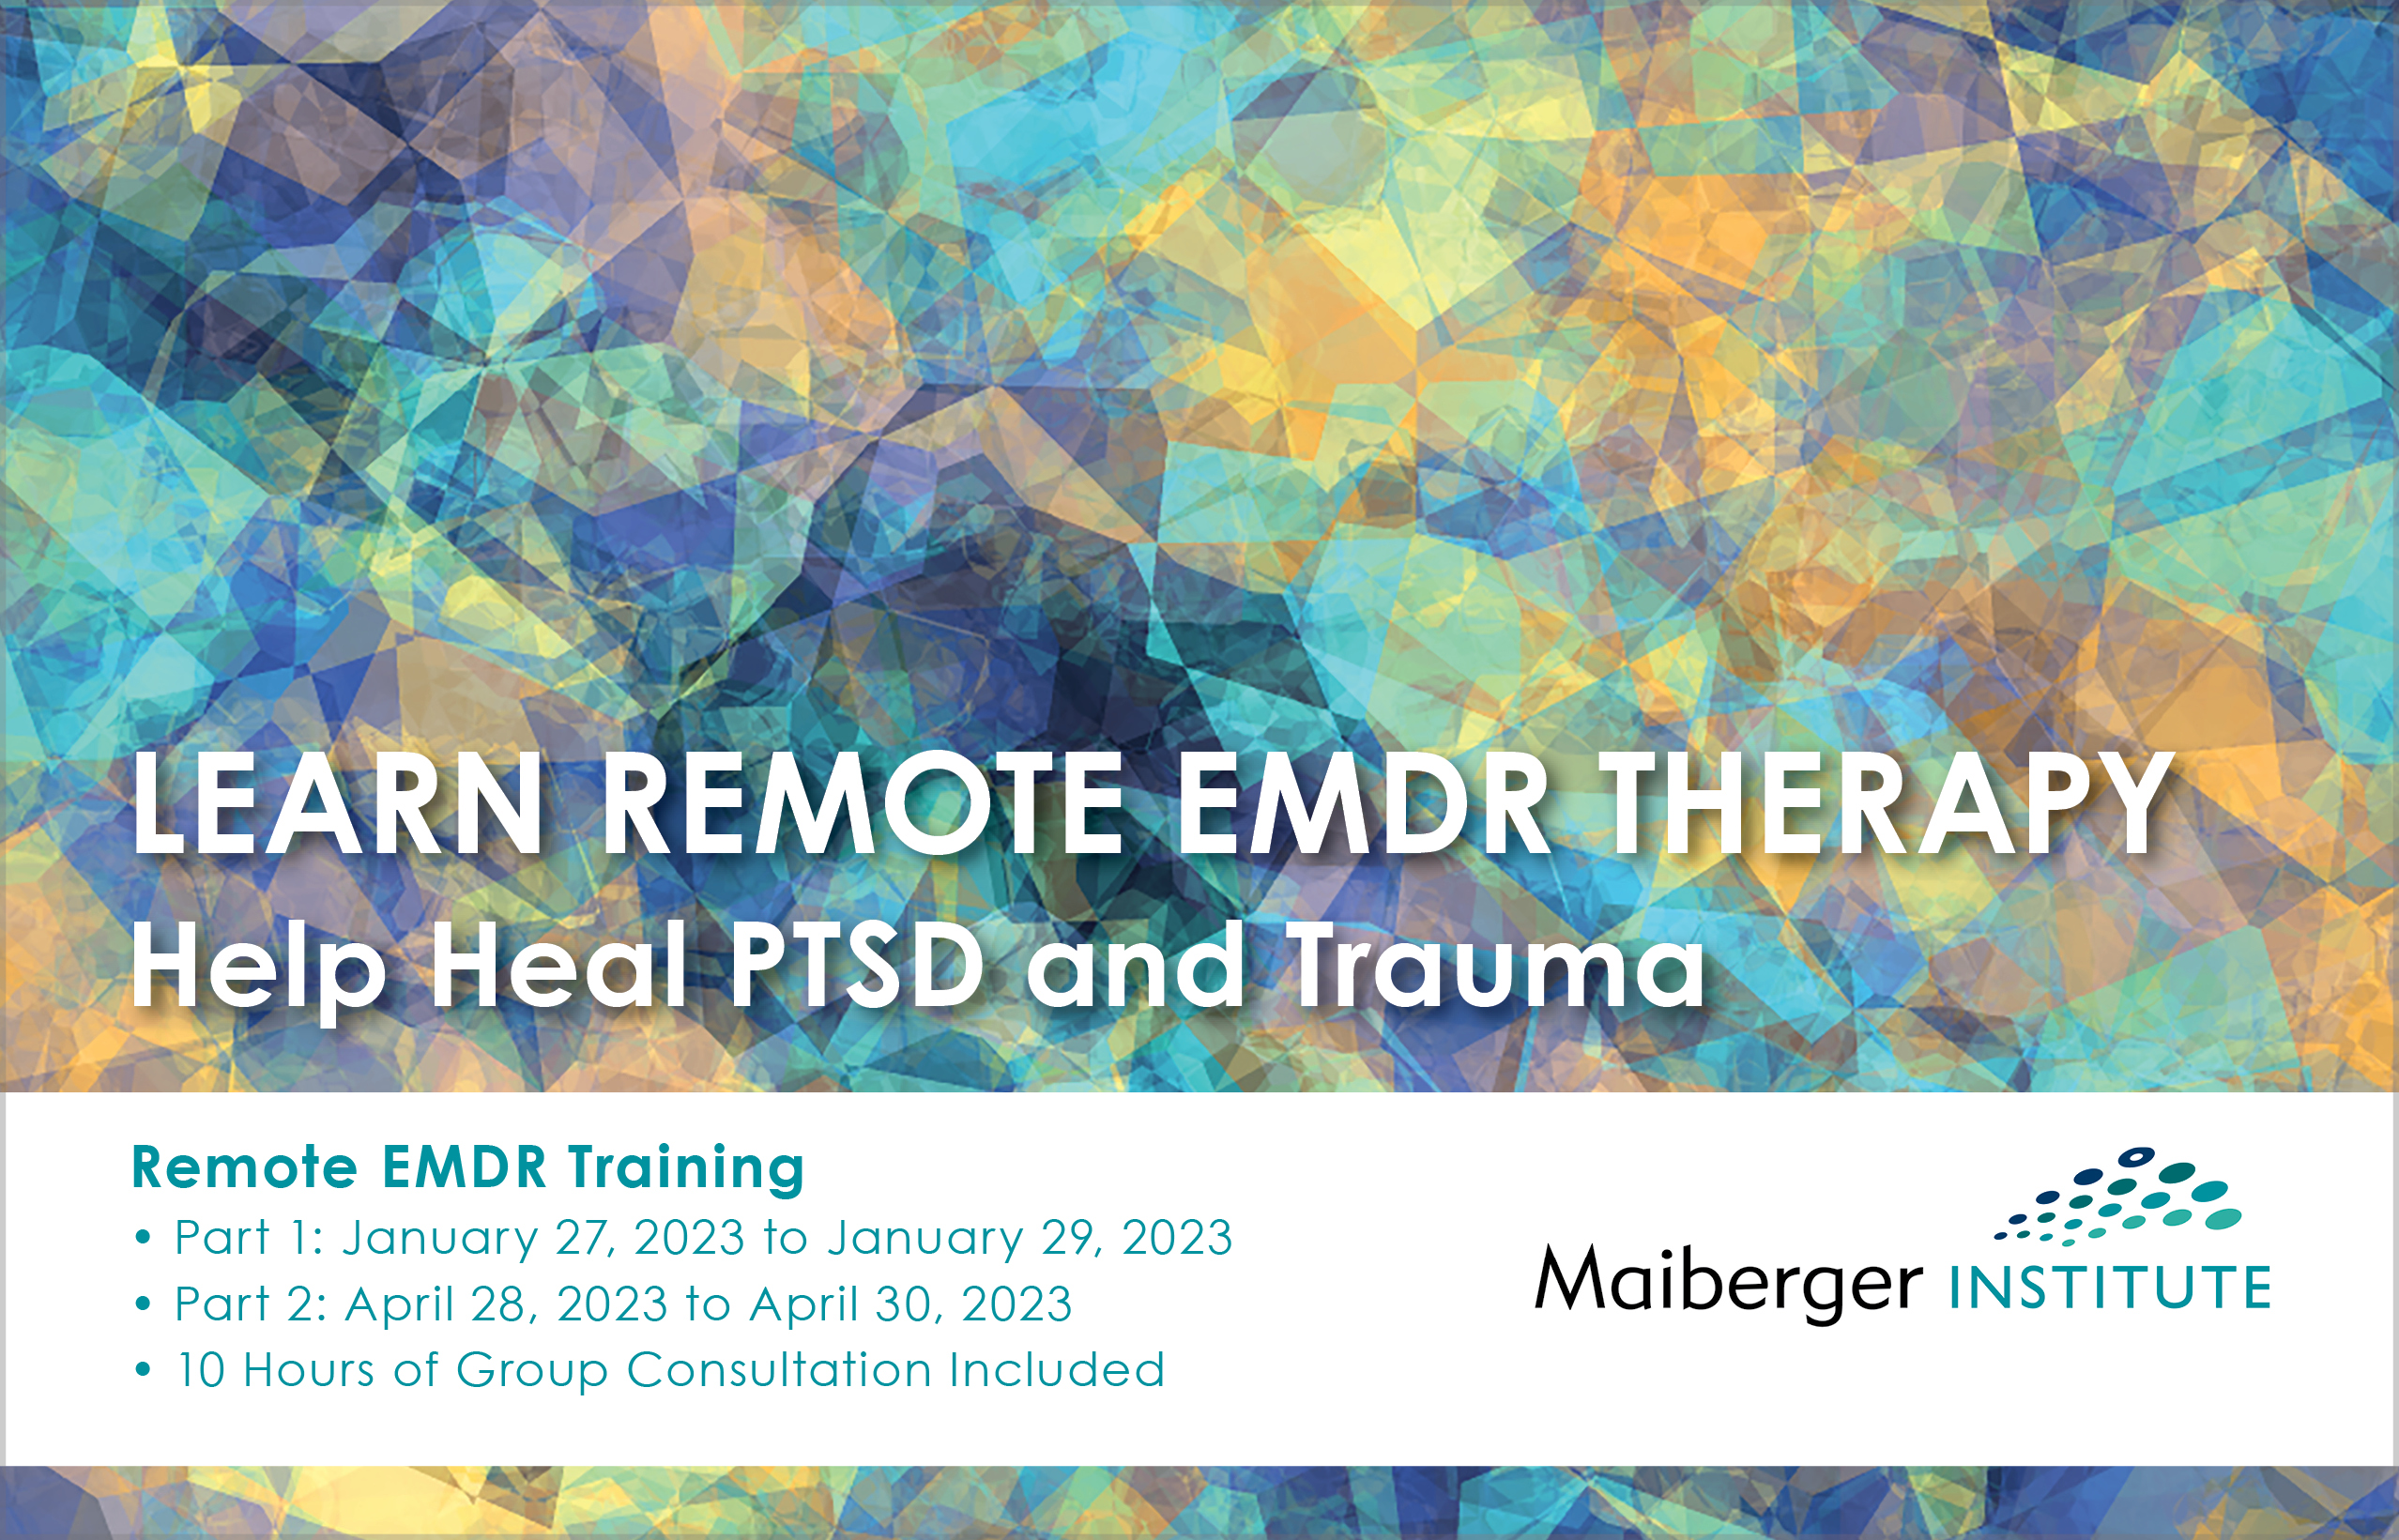 Remote EMDR Training - Part 1: January 27, 2023 to January 29, 2023 - Part 2: April 28, 2023 to April 30, 2023 - 10 Hours of Group Consultation Included